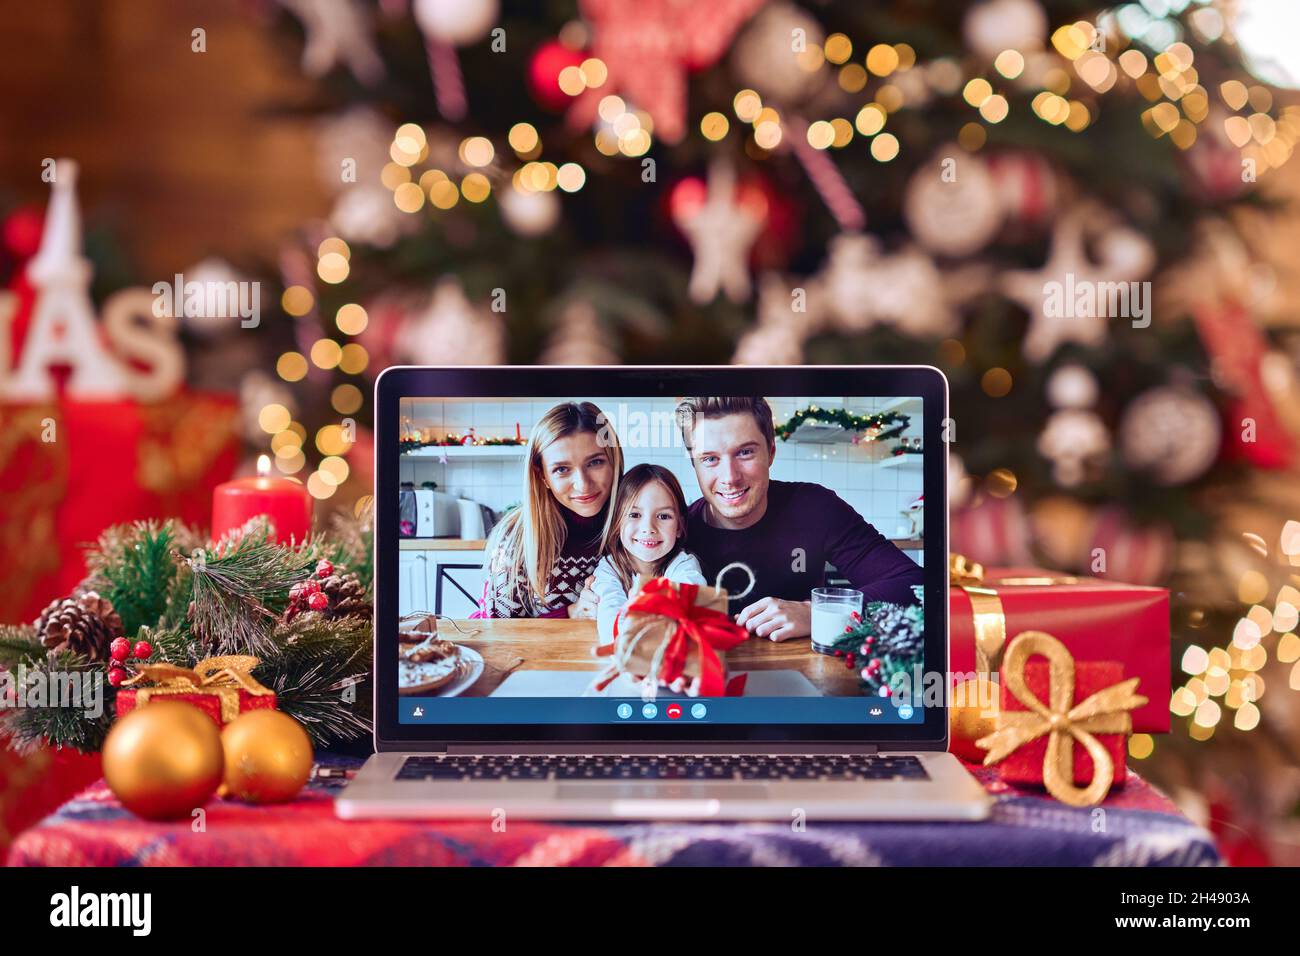 Family video call on laptop computer screen on Christmas table background. Stock Photo